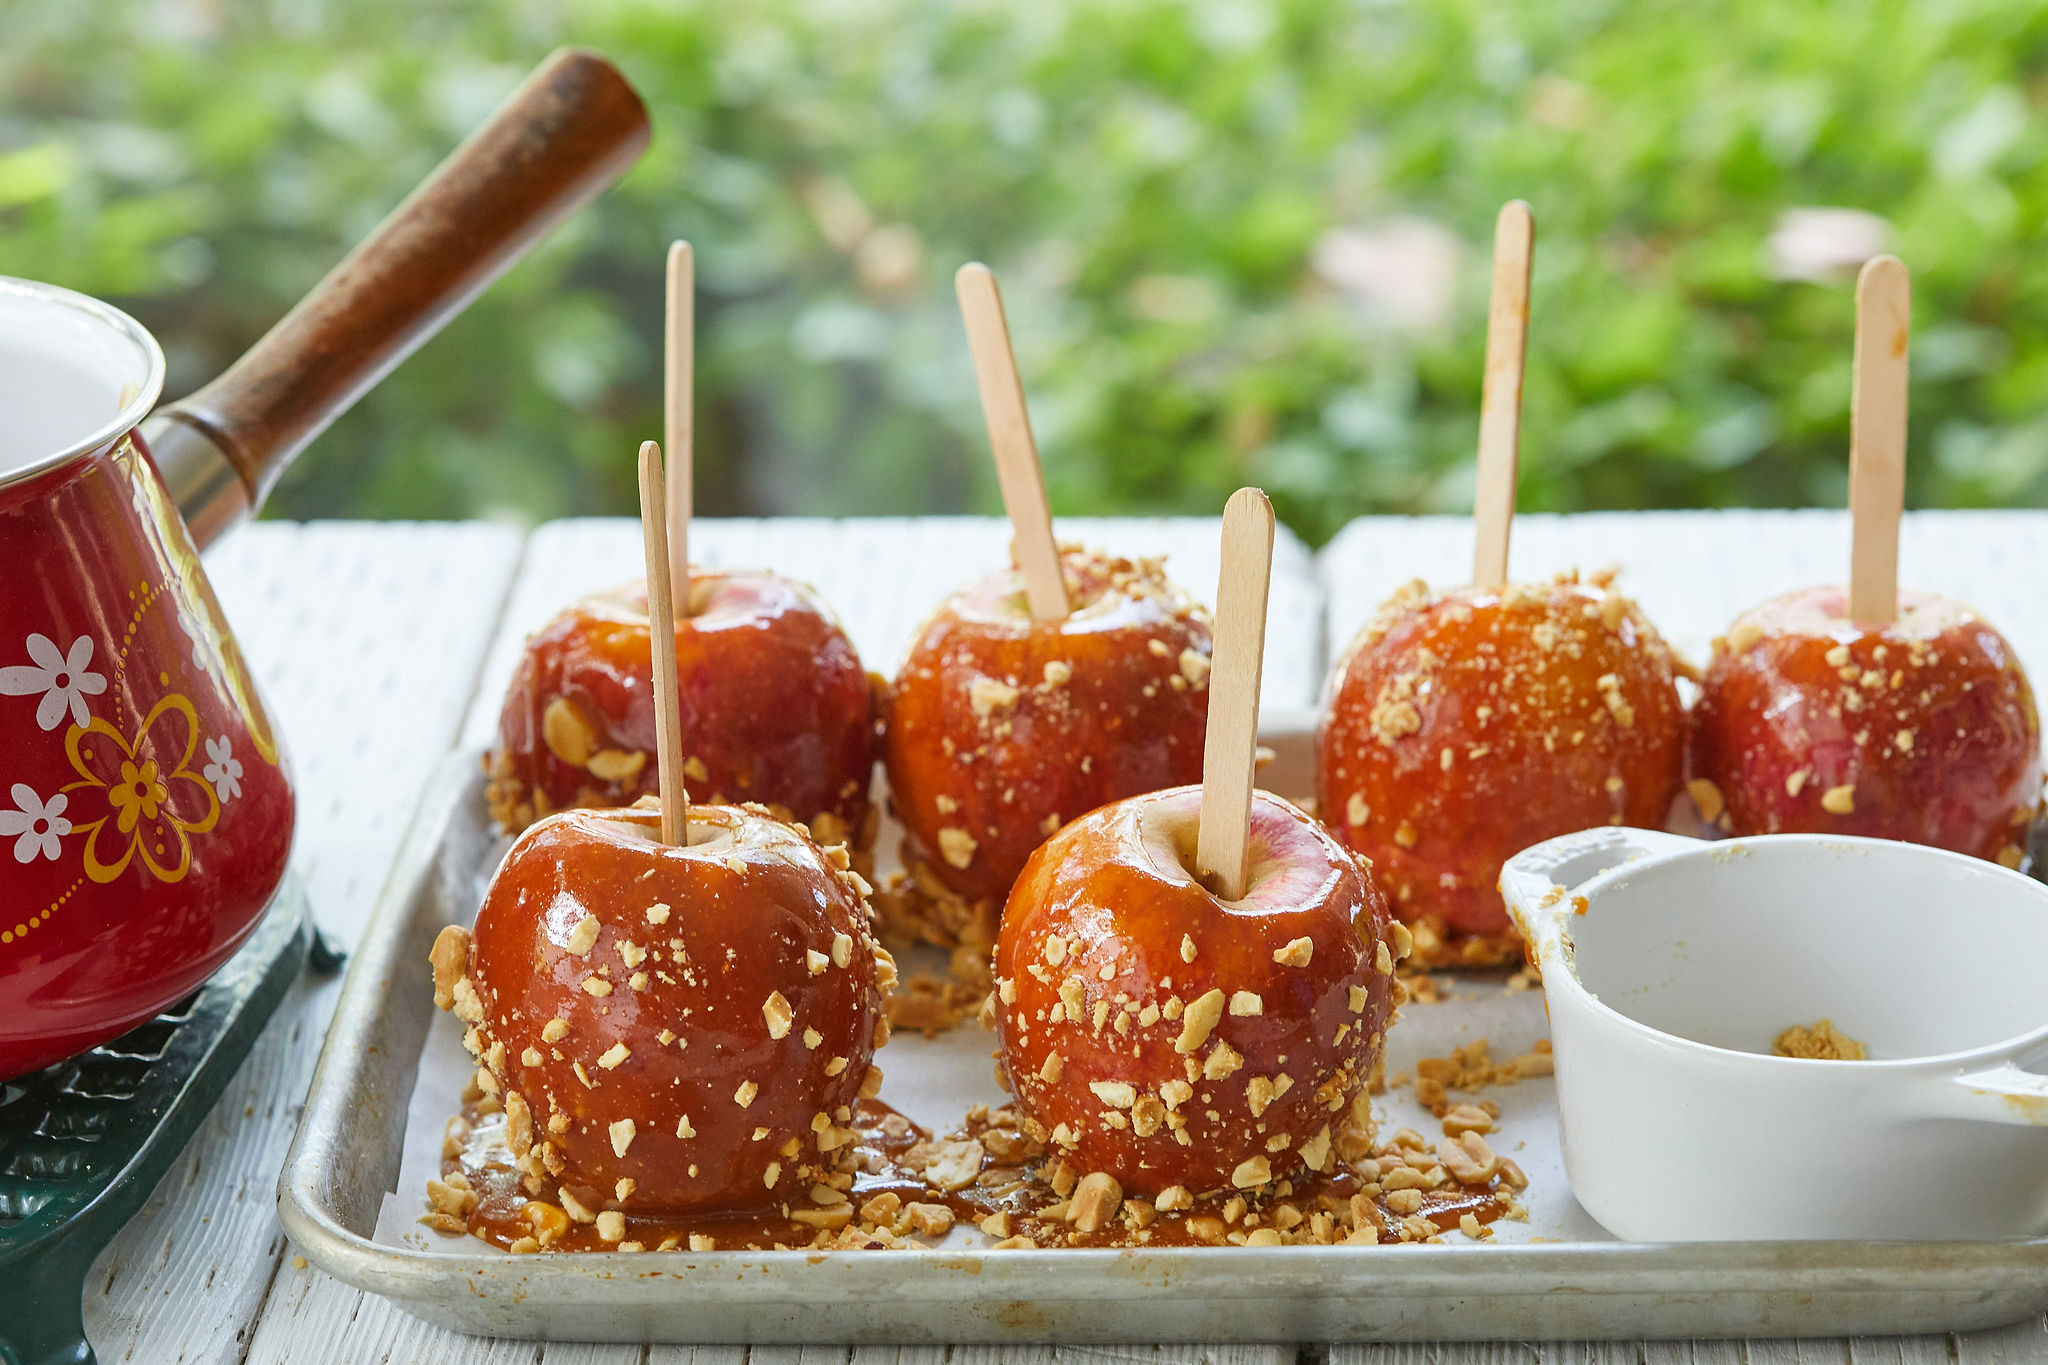 A tray of finished caramel apples.